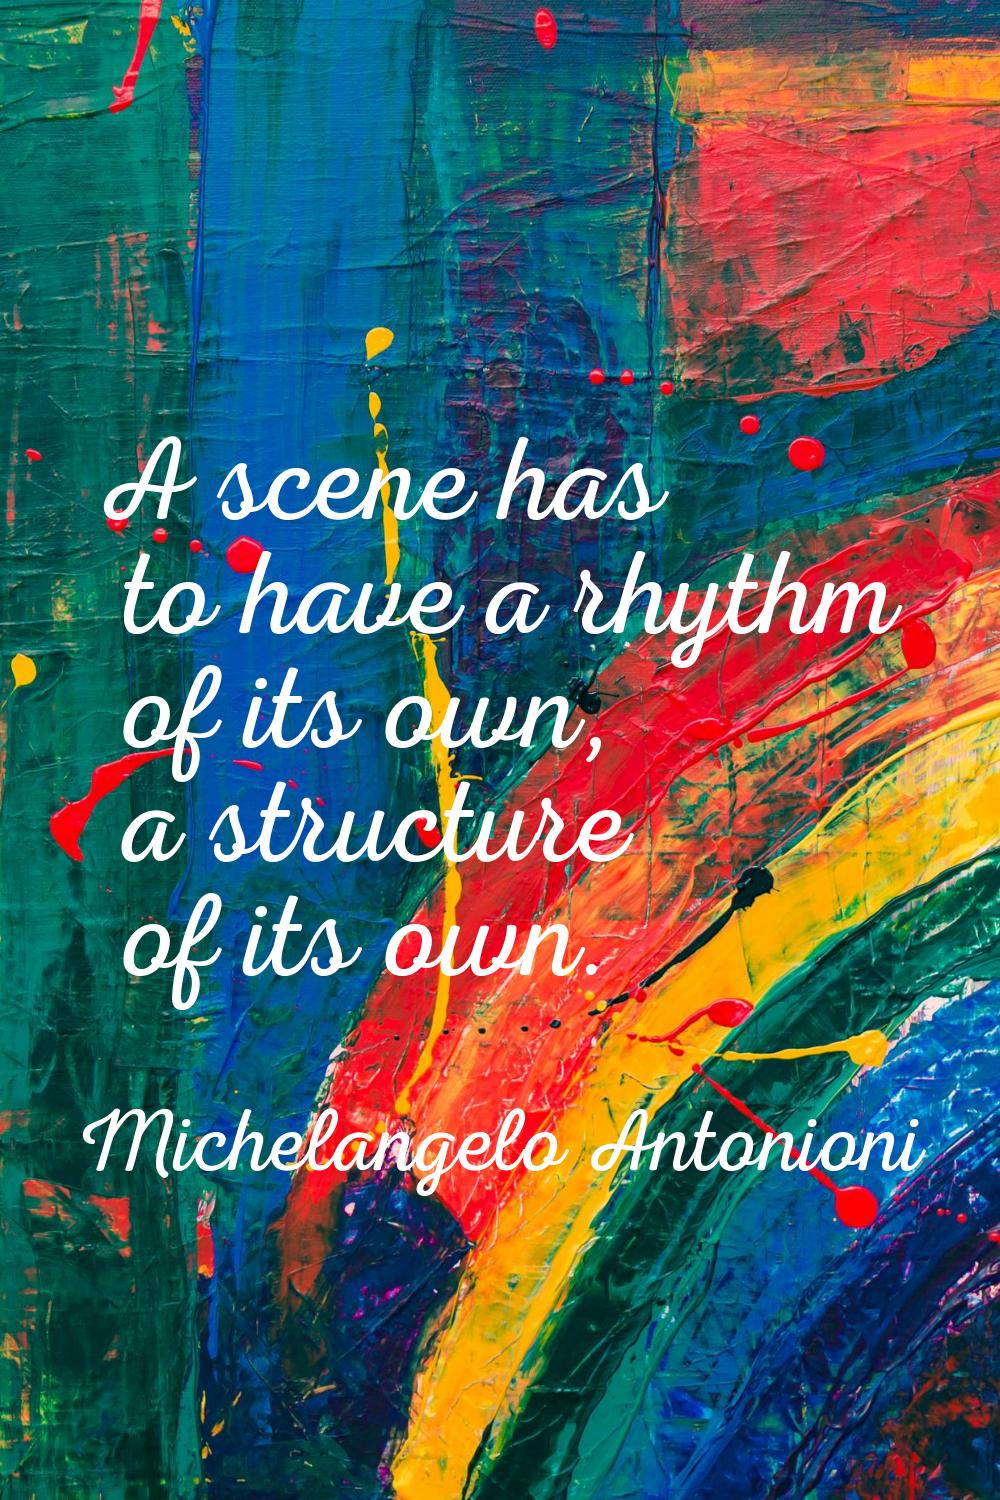 A scene has to have a rhythm of its own, a structure of its own.